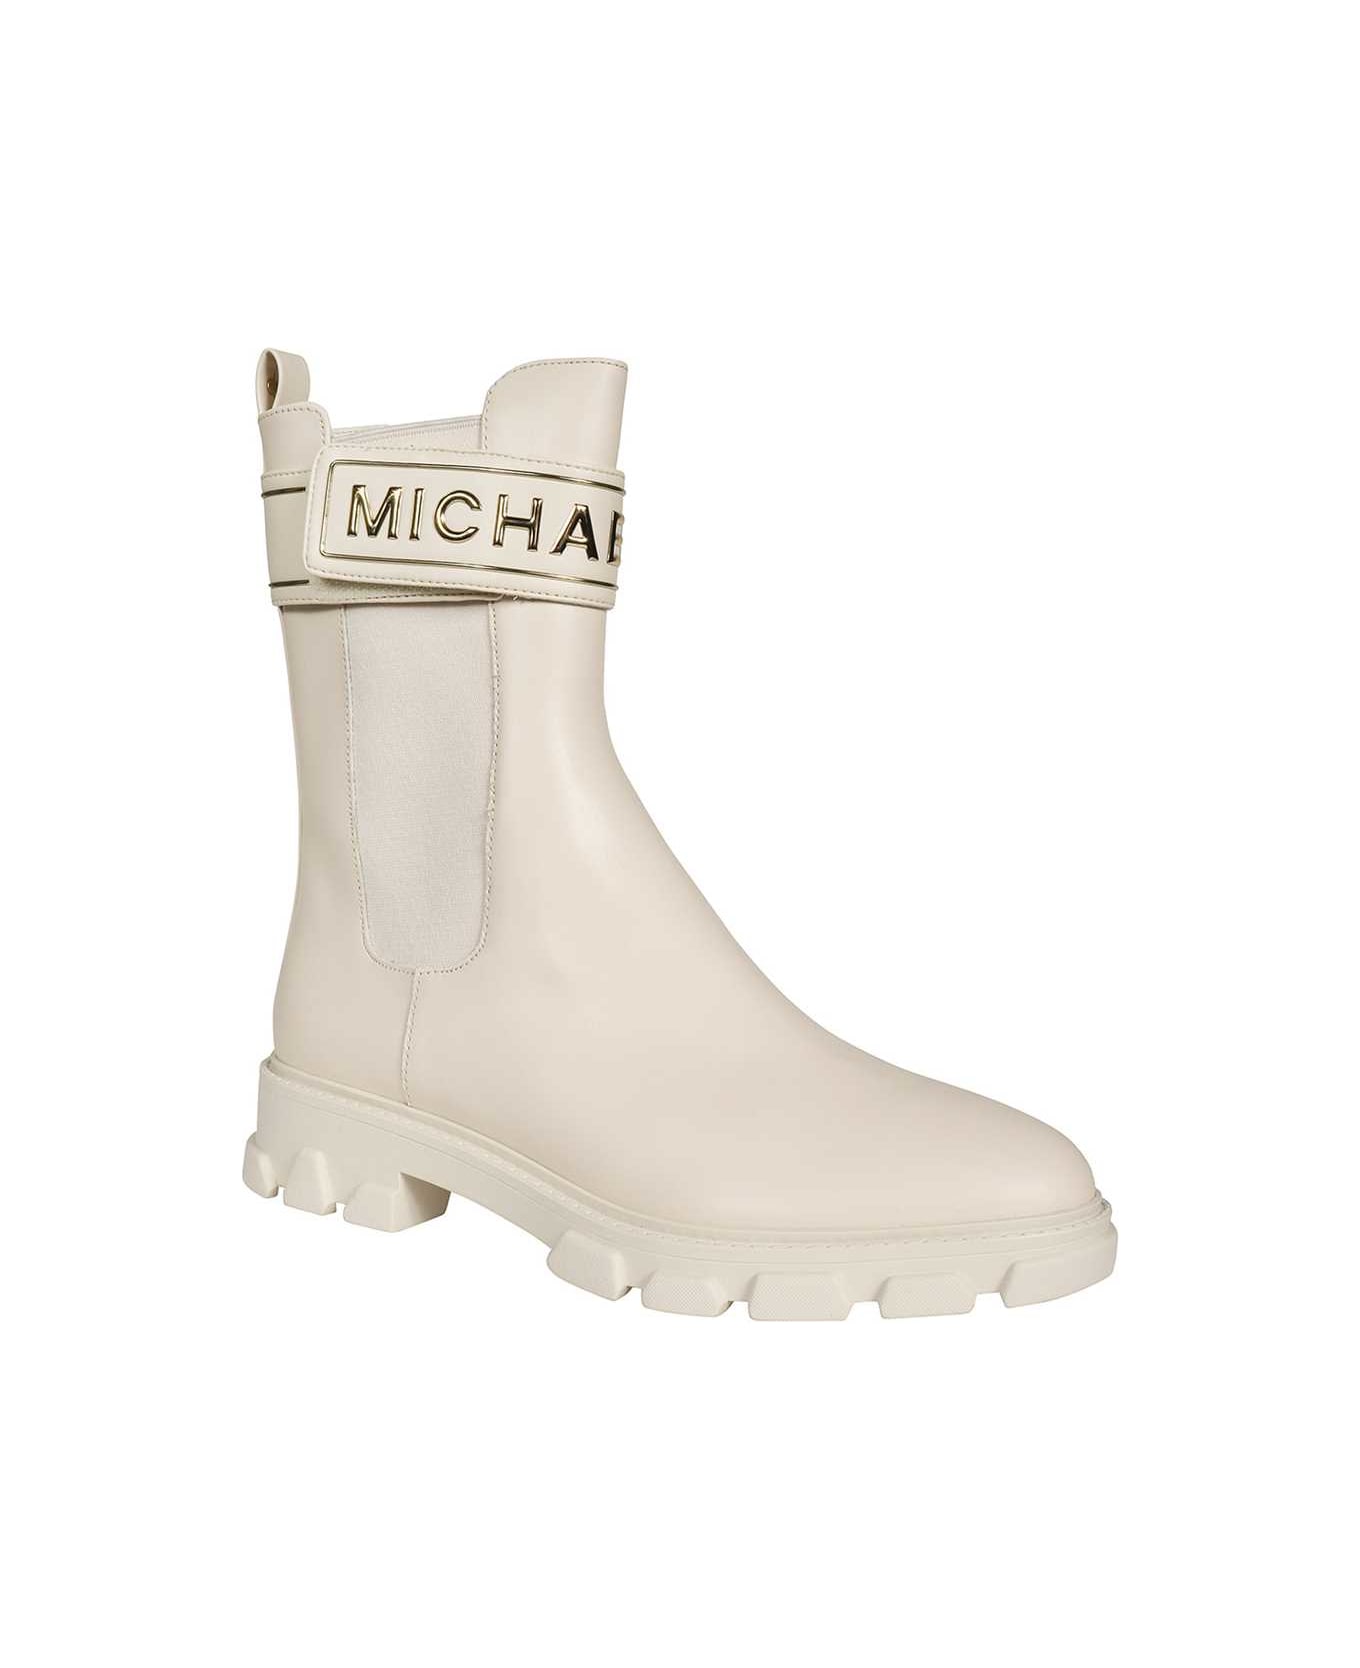 MICHAEL Michael Kors Leather Ankle Boots - White ブーツ